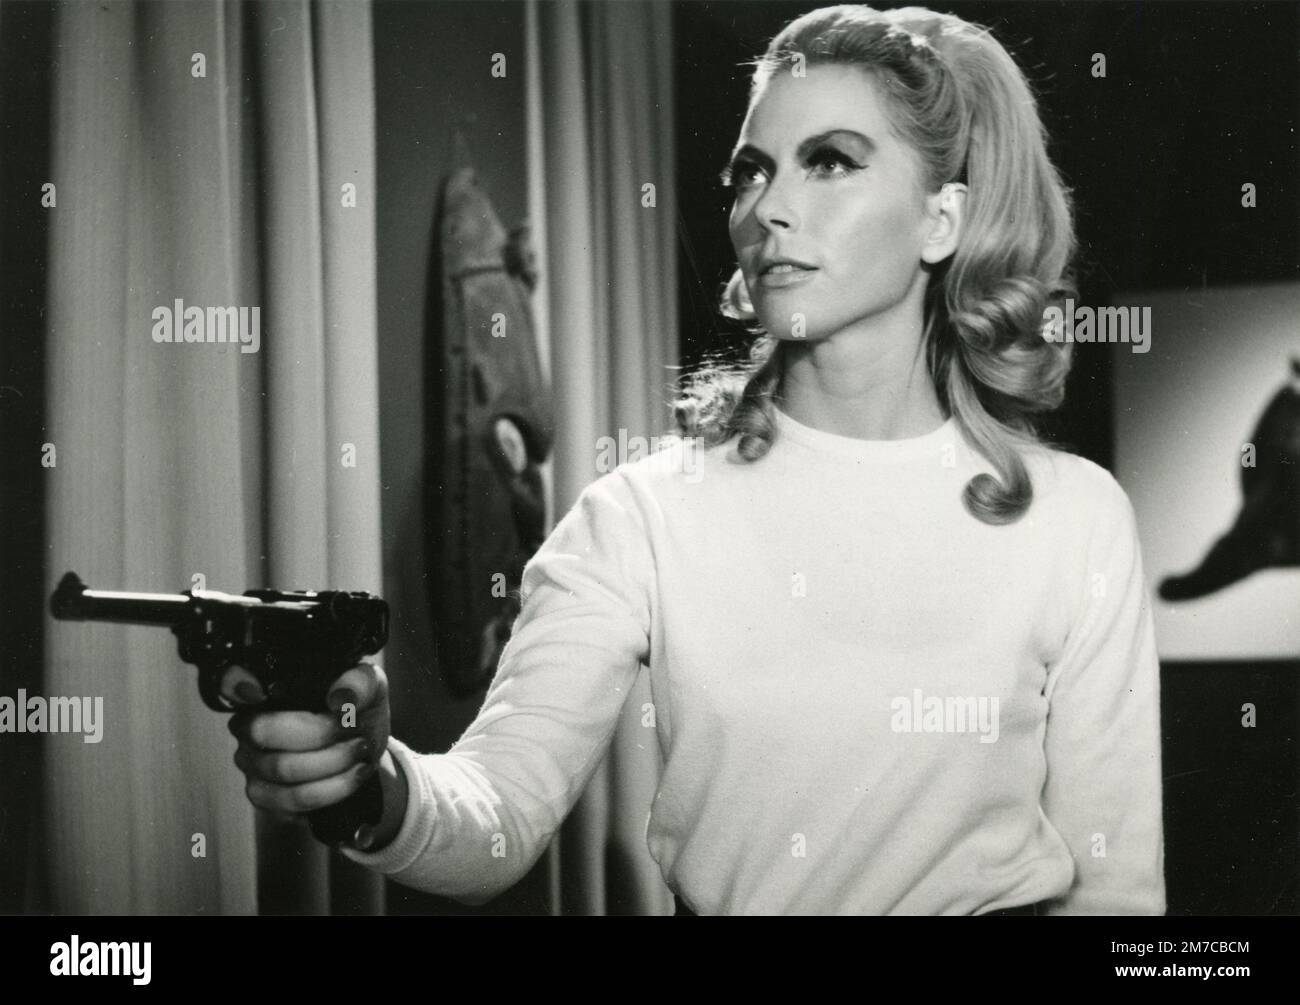 Danish actress Hanne Borchsenius in the movie There came a soldier (Det kommer en soldat), Denmark 1969 Stock Photo